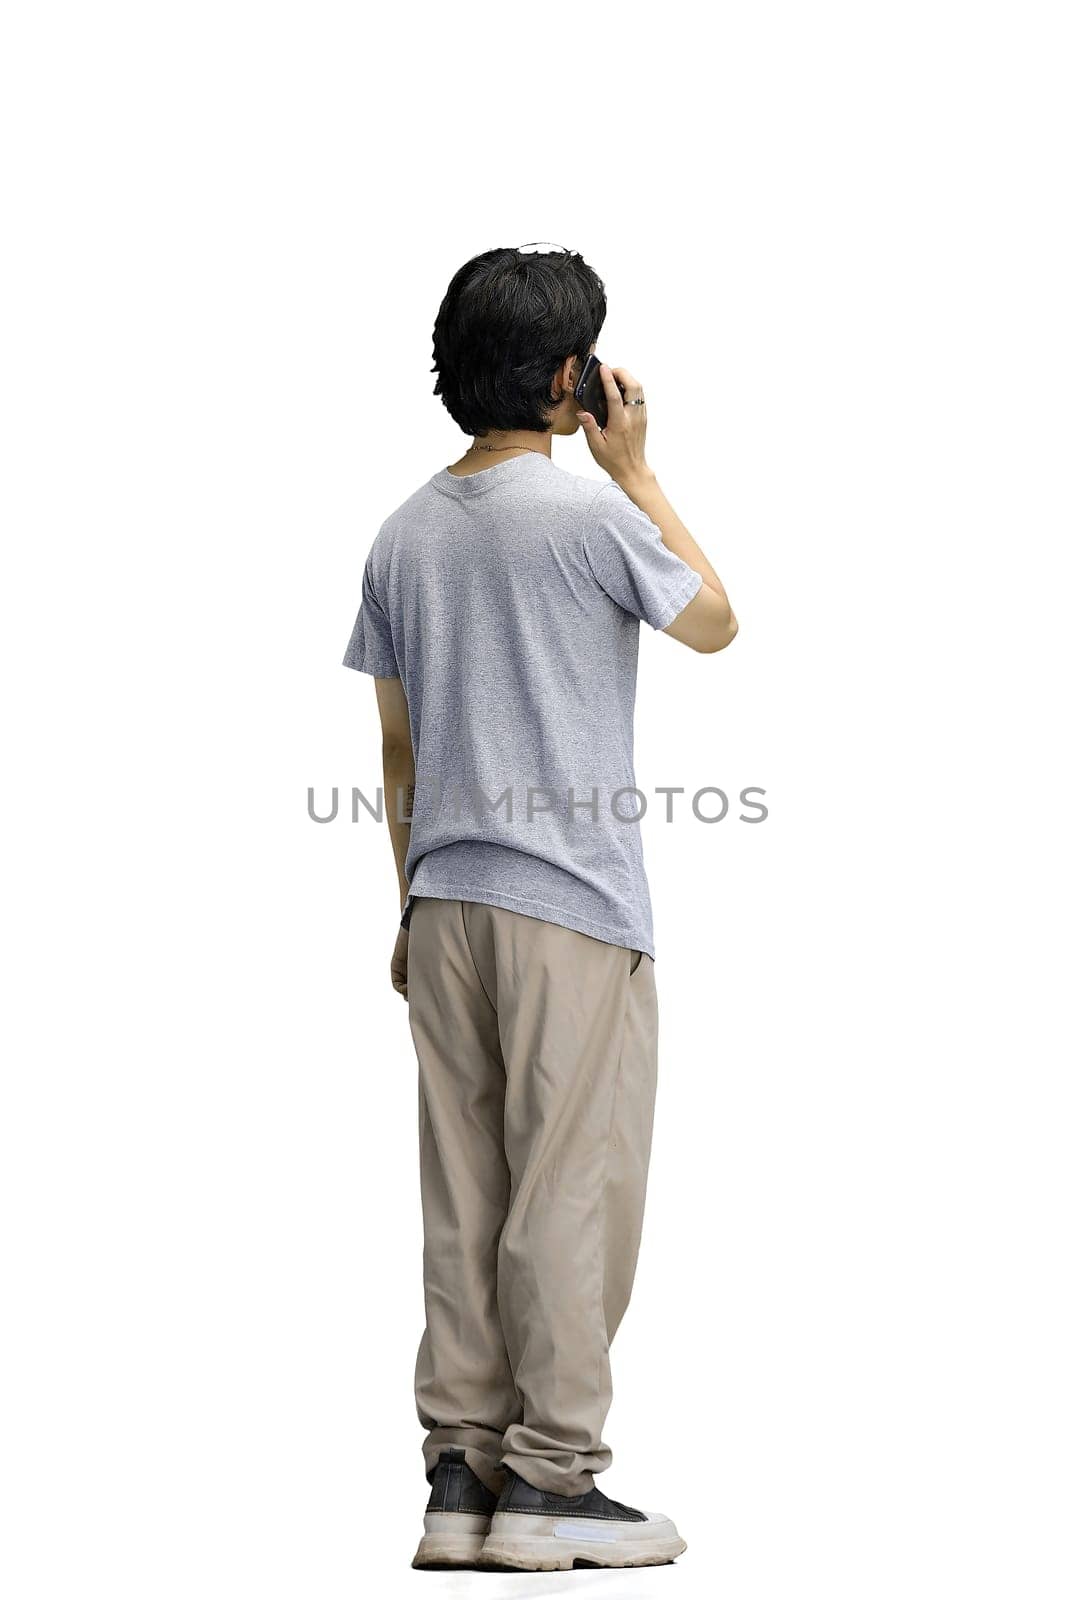 A guy in a gray T-shirt, on a white background, full-length, talking on the phone by Prosto